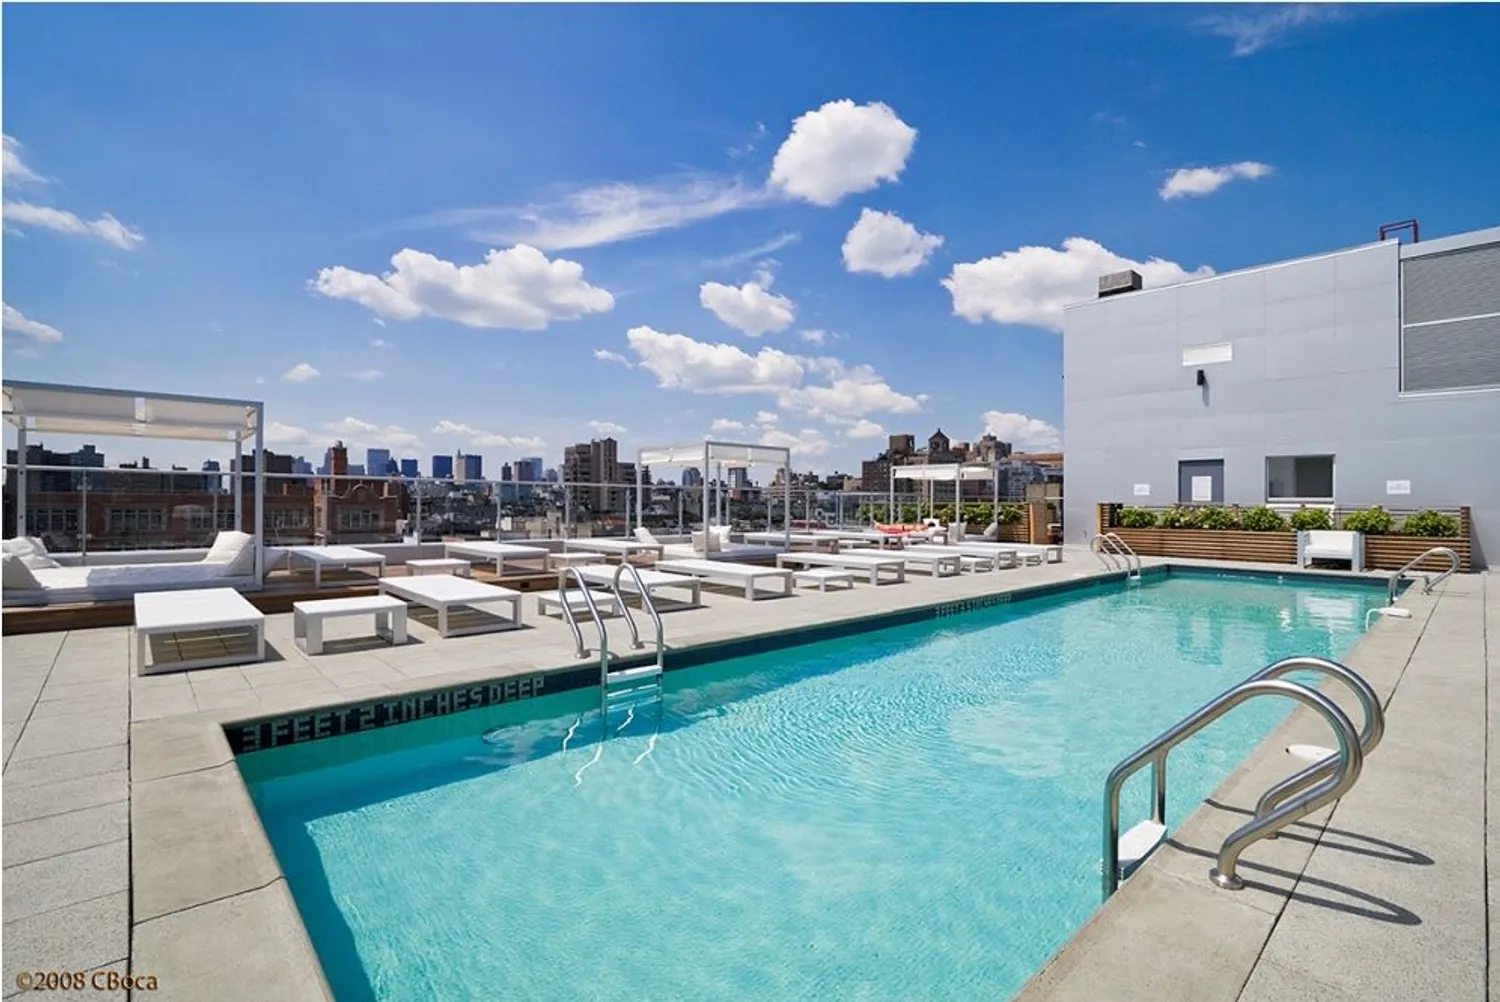 Rooftop pool with cabanas